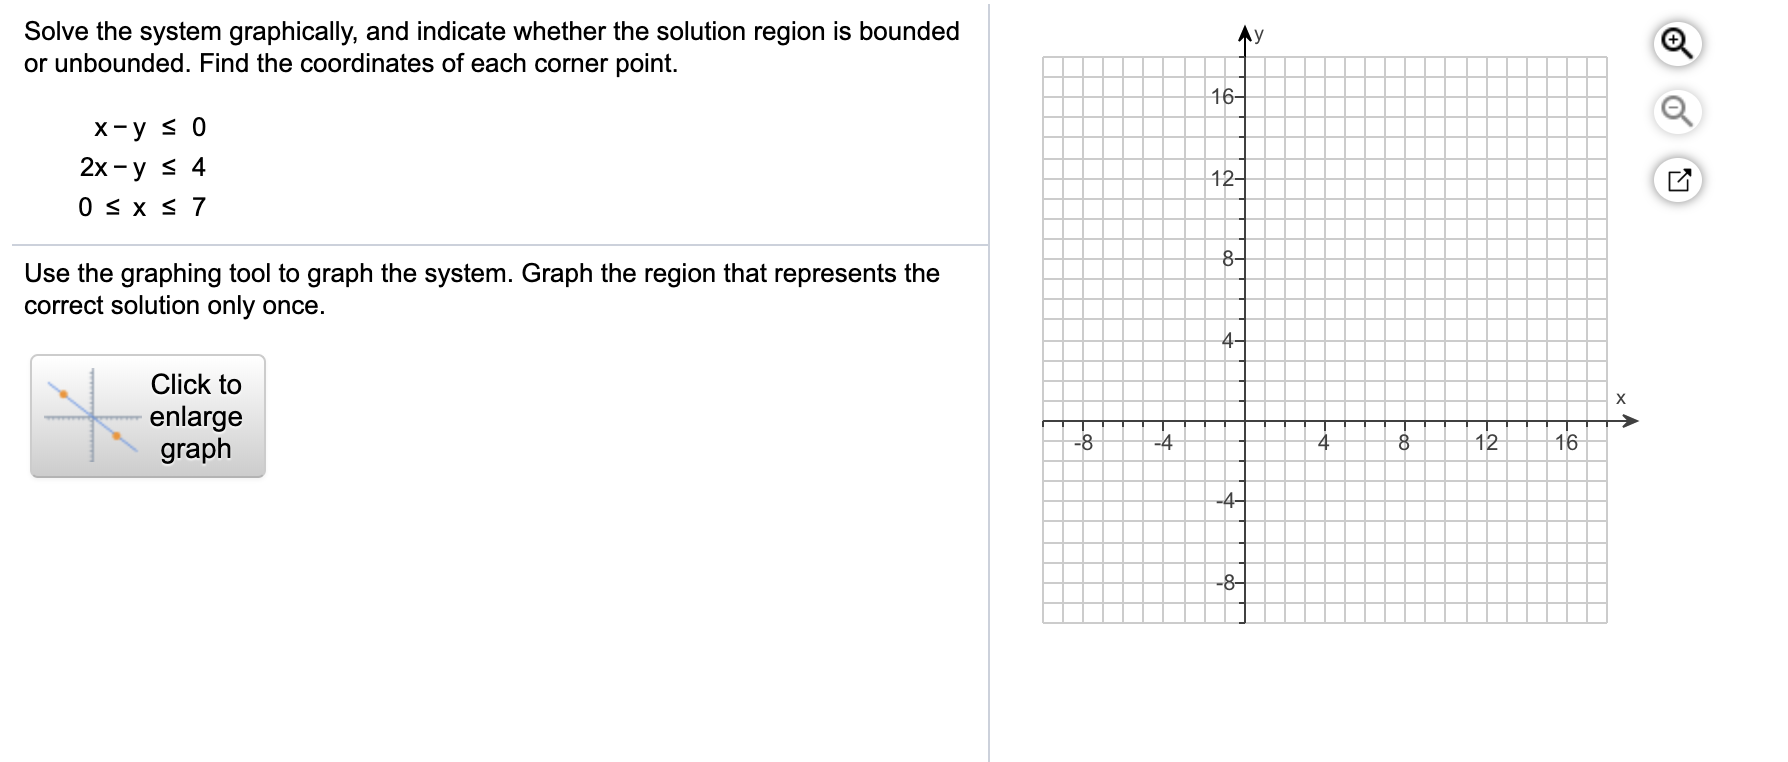 Solve the system graphically, and indicate whether the solution region is bounded
or unbounded. Find the coordinates of each corner point.
Ay
16-
х-у S 0
2х - у s 4
0 S x s 7
12-
8-
Use the graphing tool to graph the system. Graph the region that represents the
correct solution only once.
4-
Click to
х
enlarge
graph
-8
-4
8
12
16
-4-
-8-
--
